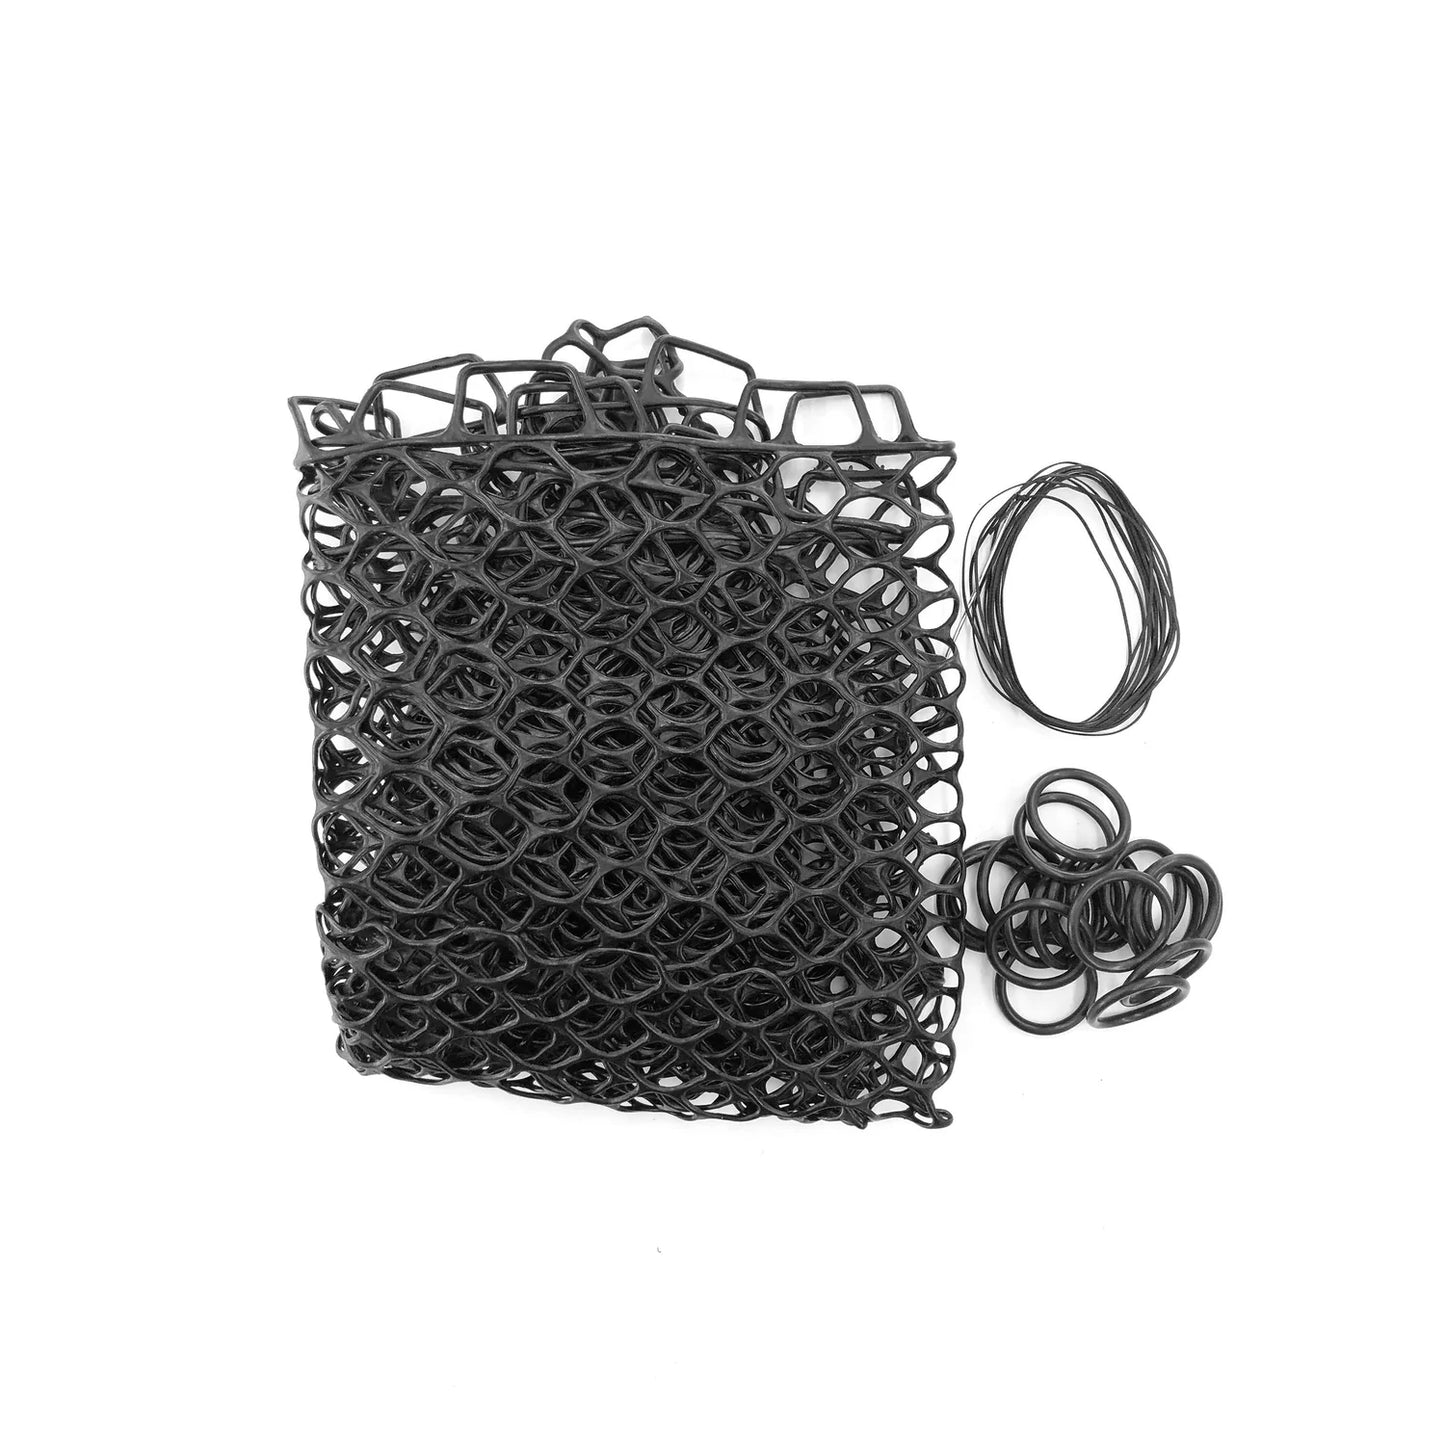 Fishpond Nomad Replacement Rubber Net - Large Black